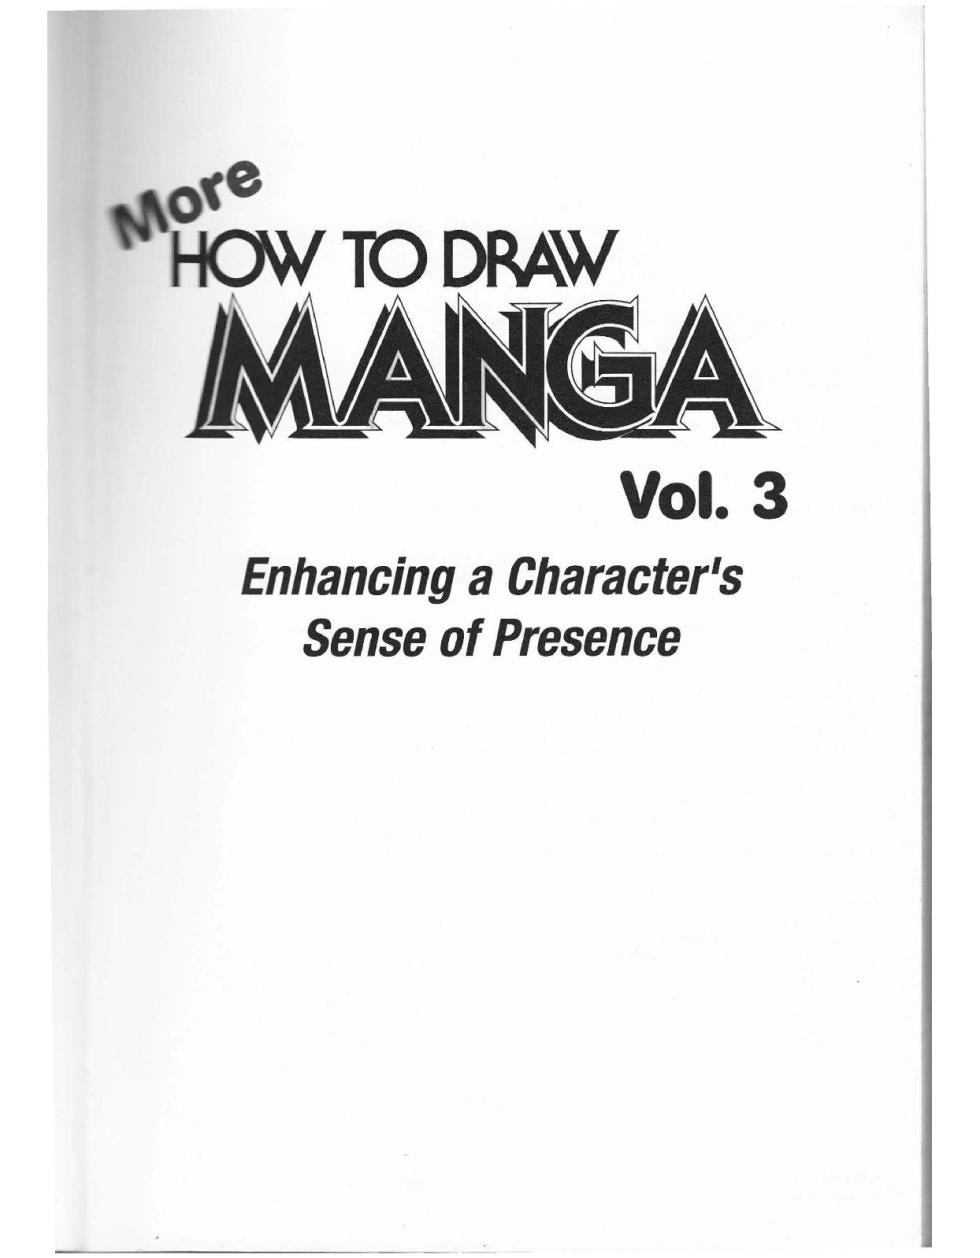 More How to Draw Manga Vol. 3 - Enhancing a Character's Sense of Presence - Page 3